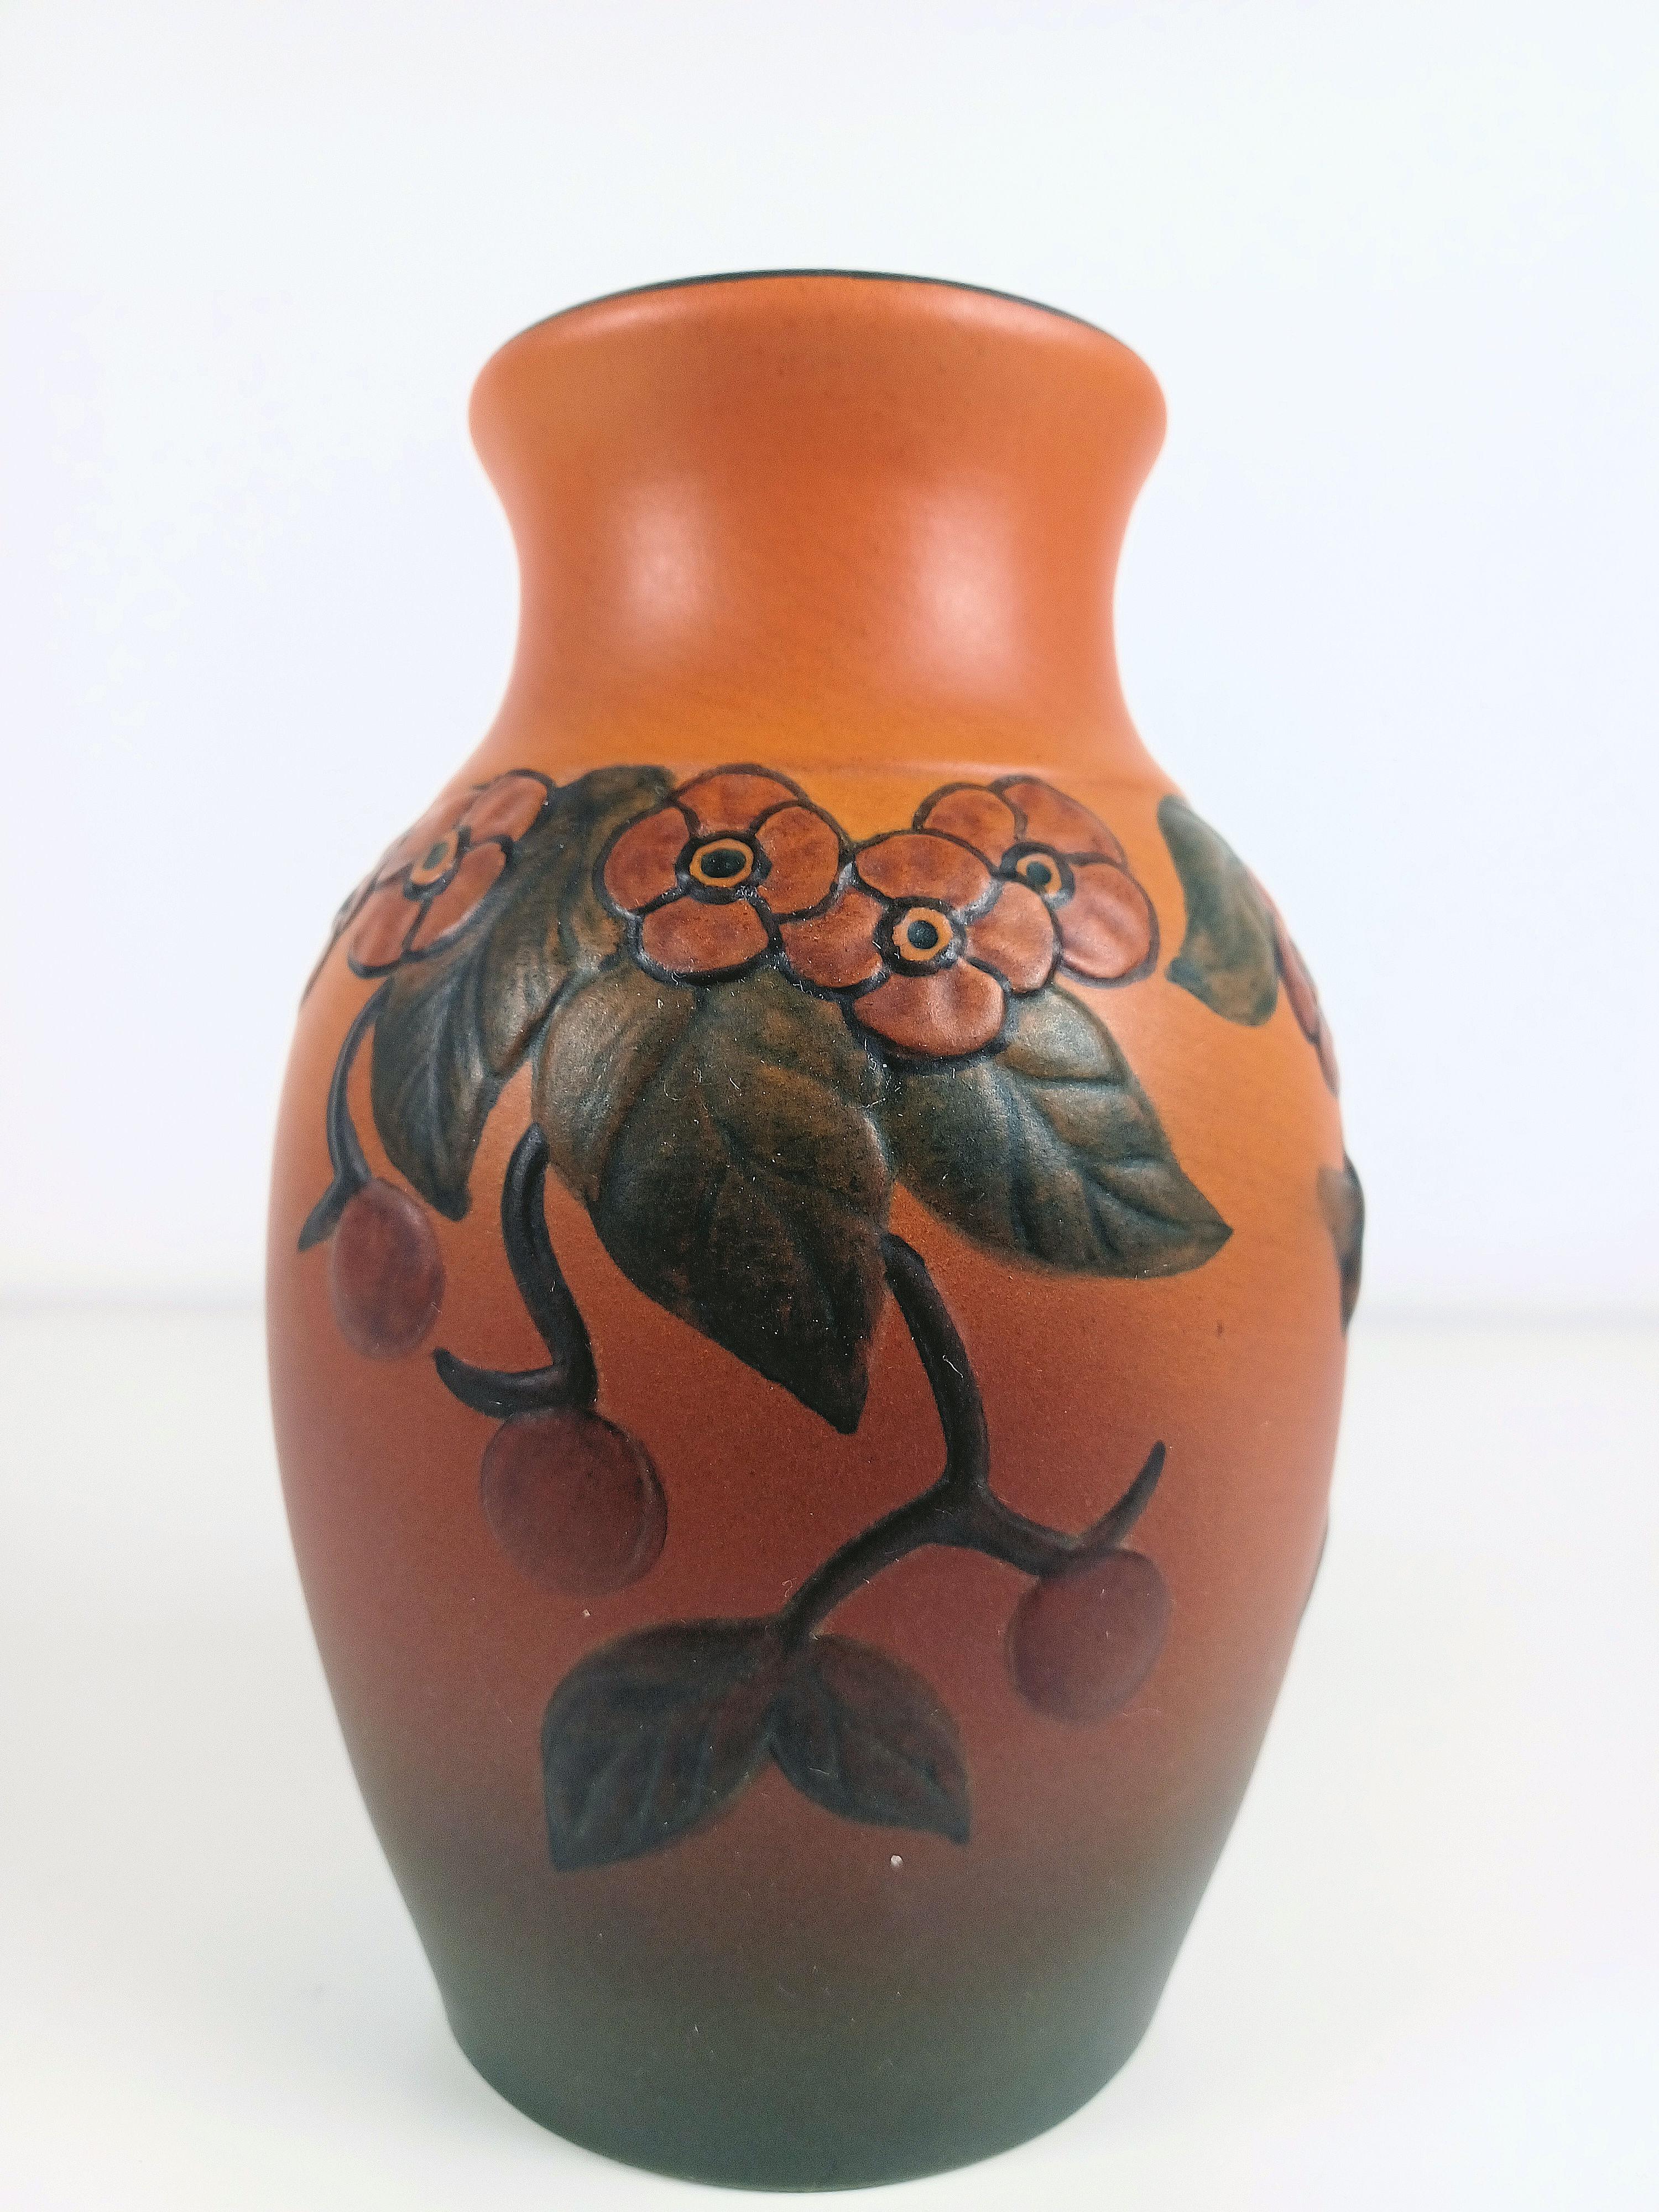 Hand-crafted Danish Art Nouveau flower decorated vase by P. Ipsens Enke

The hand-crafted art nouveau vase was designed by Axel Sørensen in 1927 and feature  flowers, leafs, berries and a single bee on it's way to a flower. 

P. Ipsens Enke (1843 -